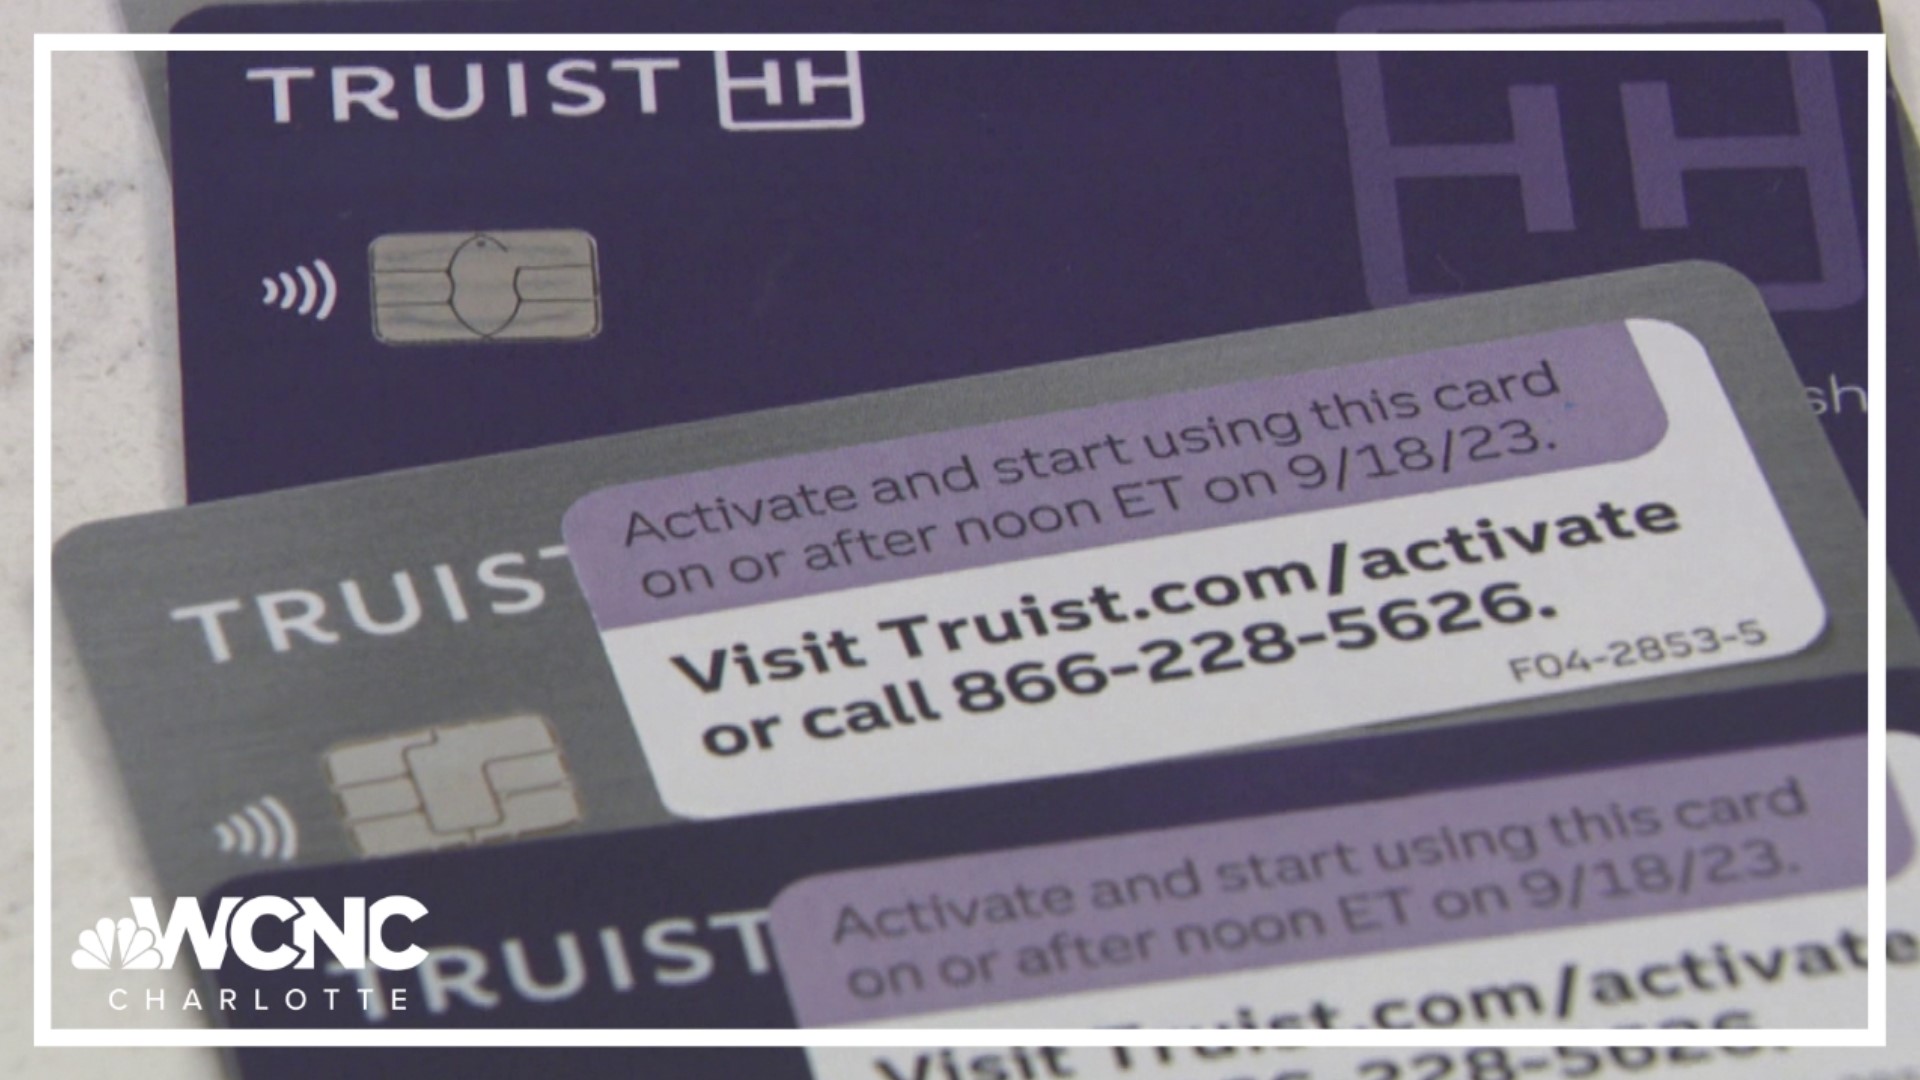 Many customers at Truist can't use their credit cards.